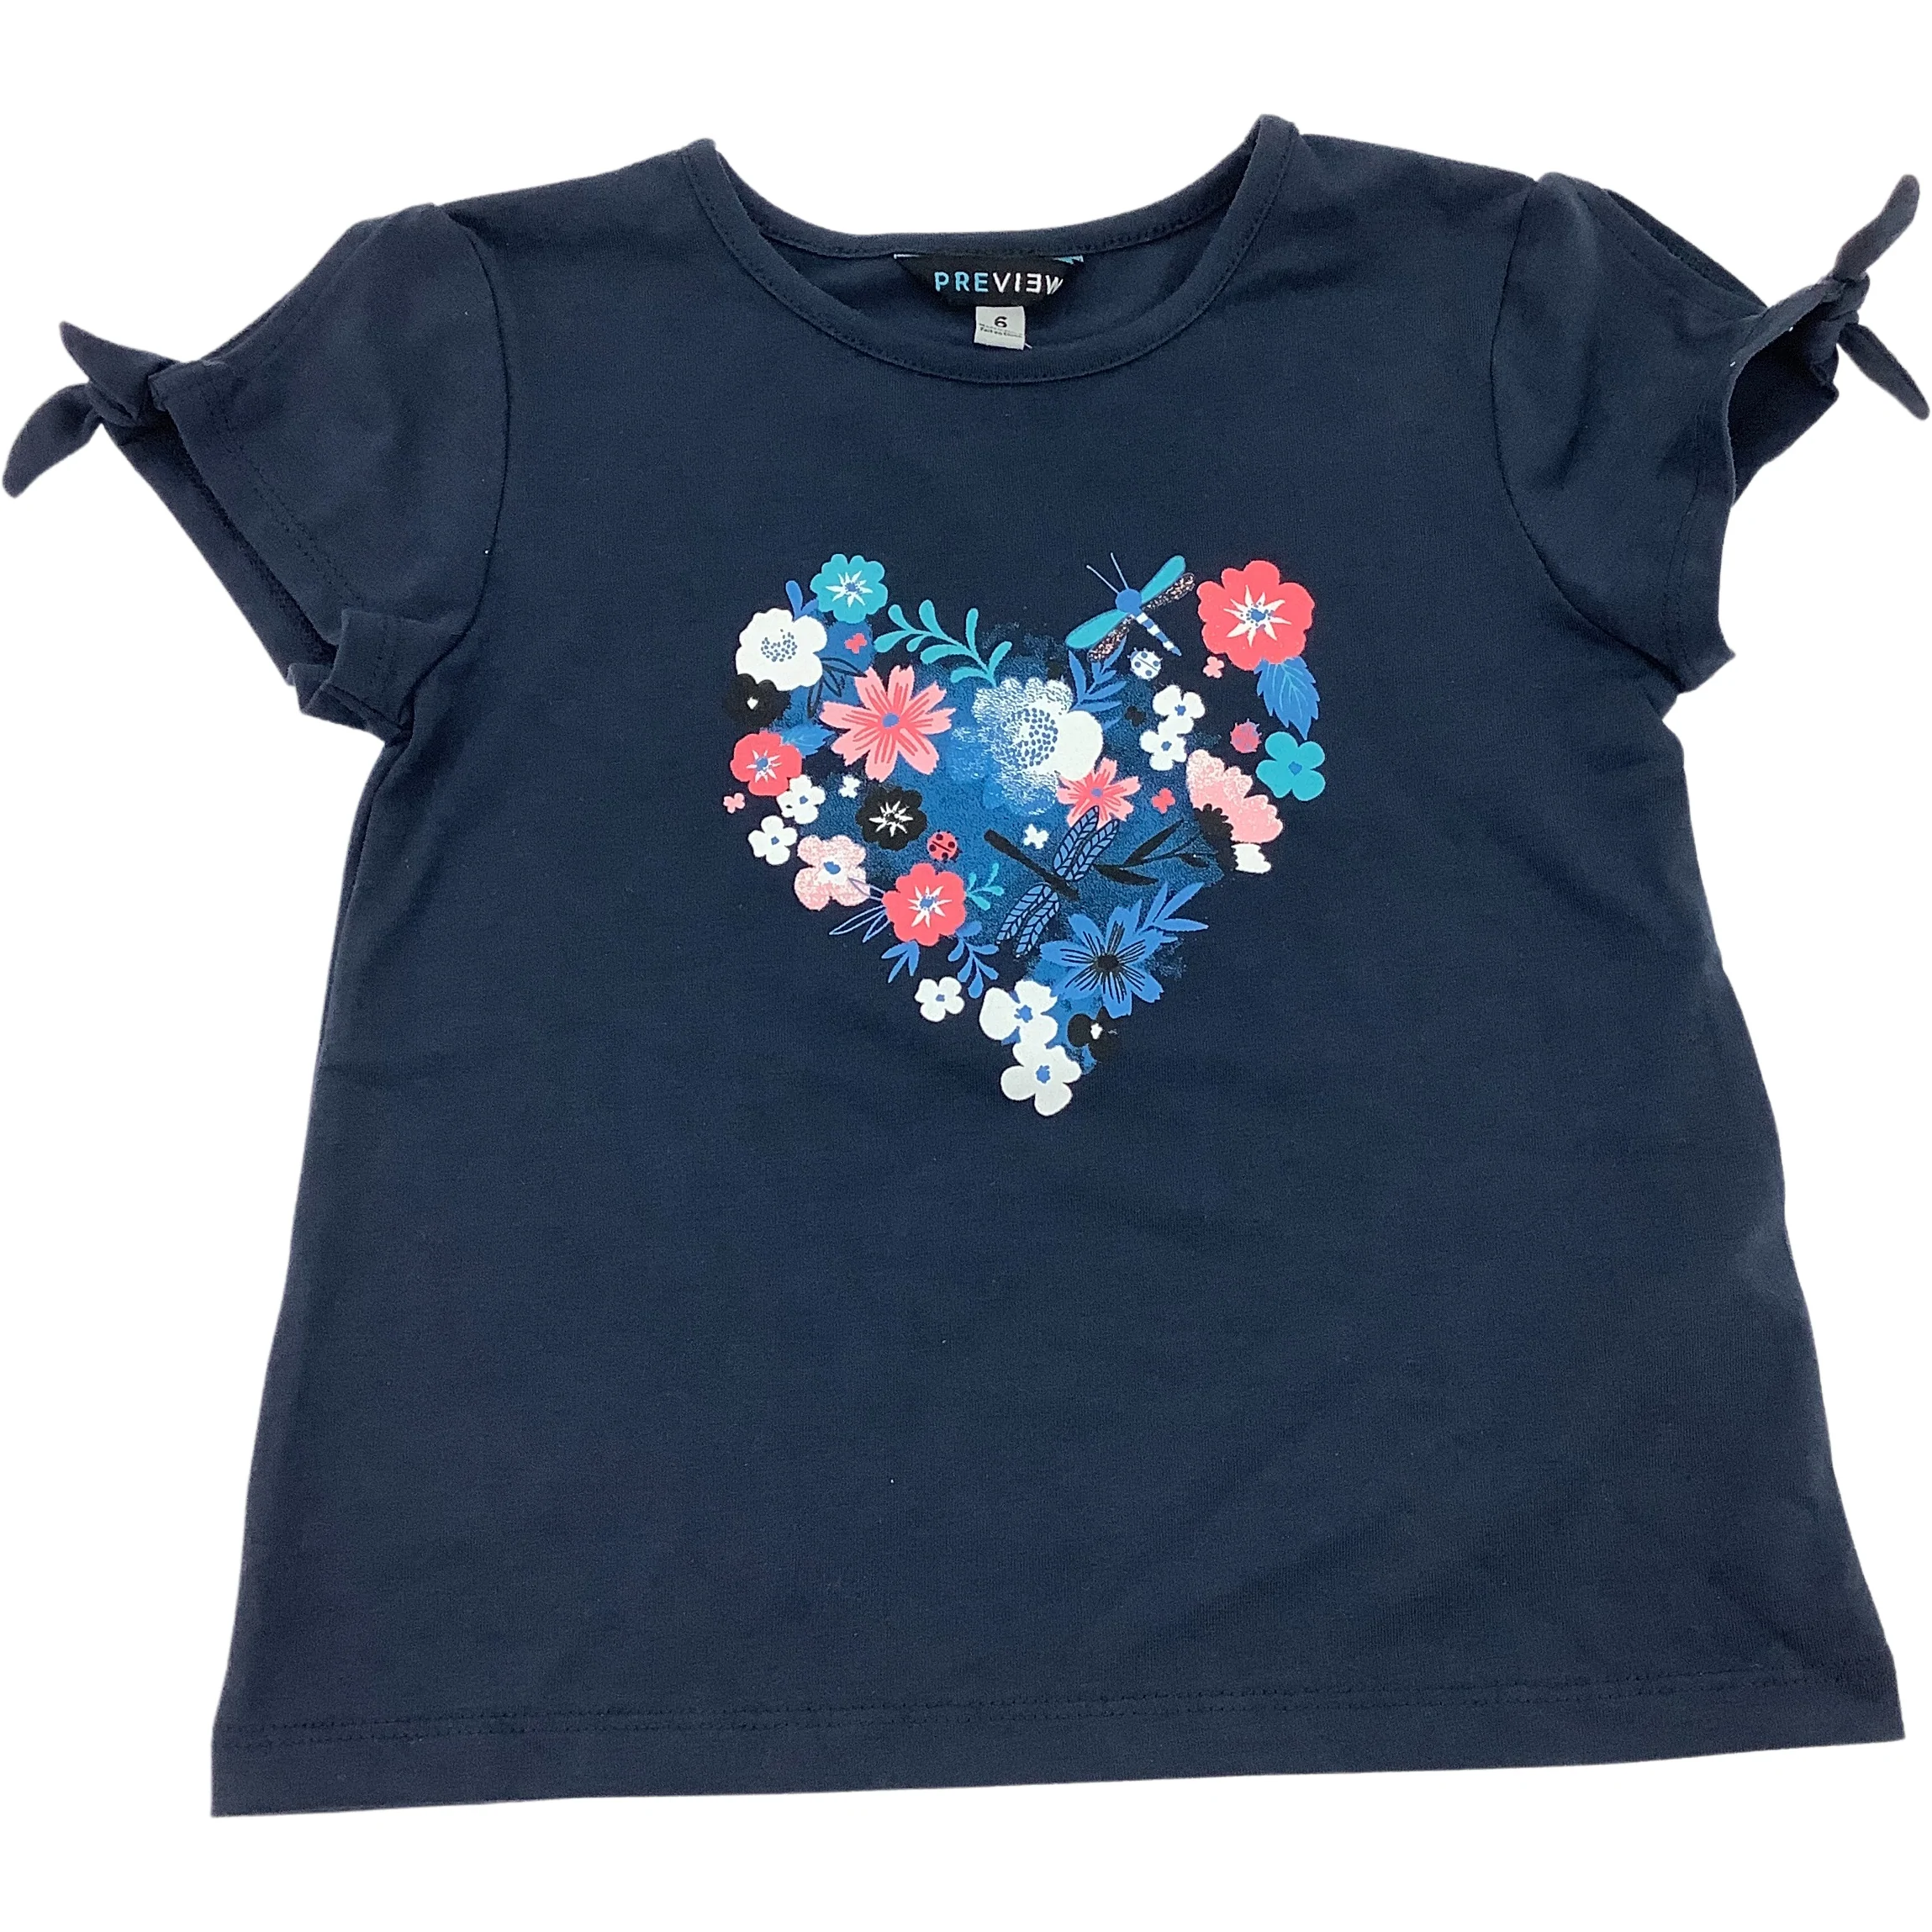 Preview Girl's T-Shirt / Blue / Heart / Kid's Summer Clothes / Size 6